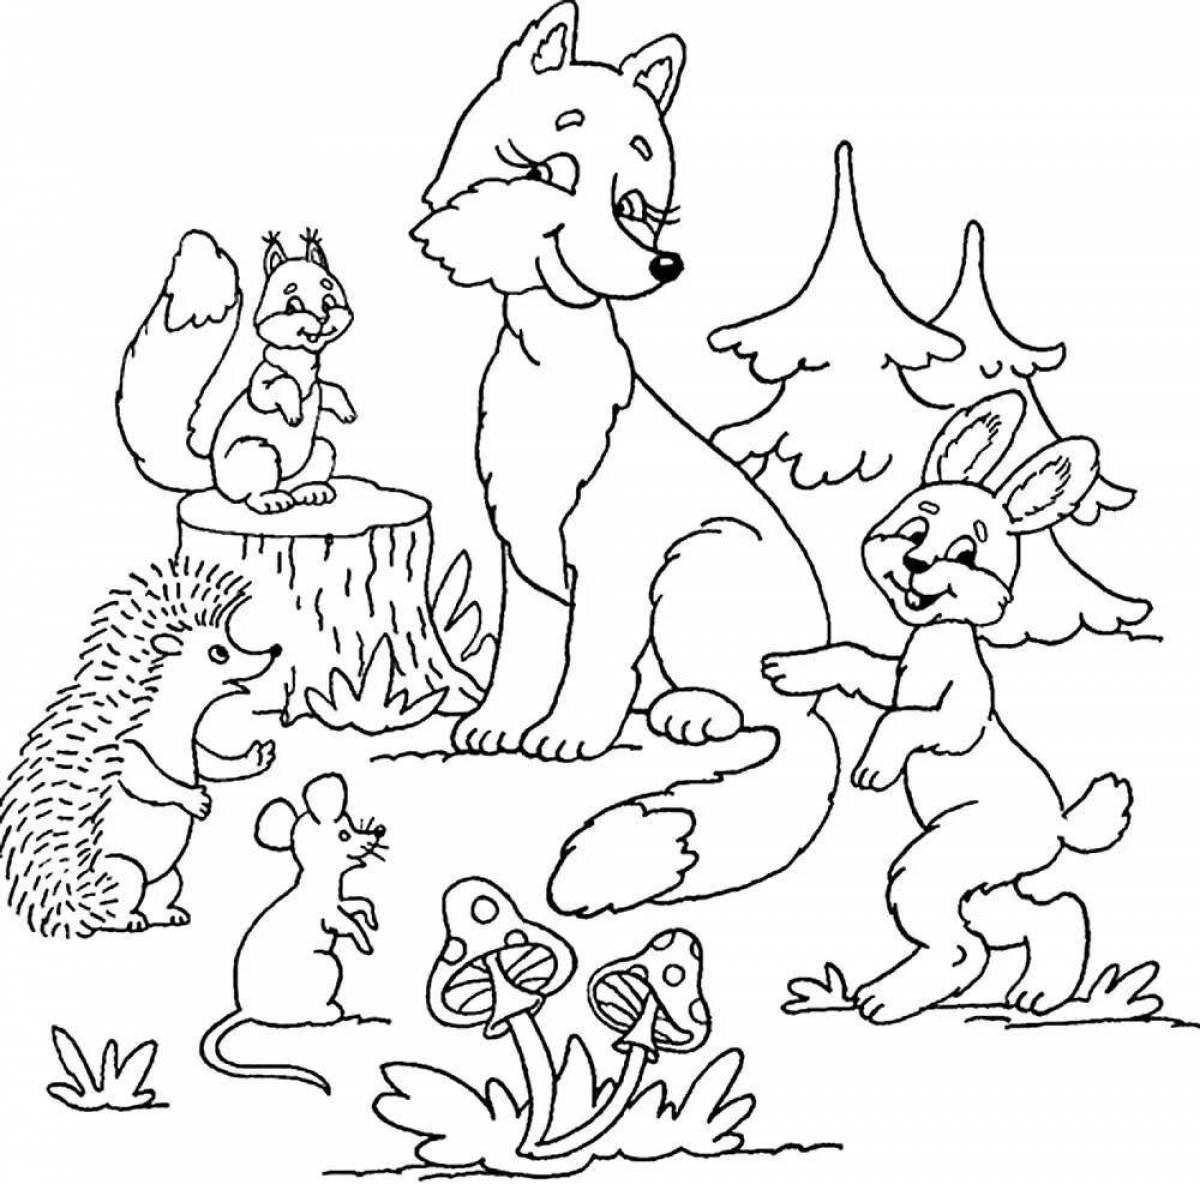 Fantastic forest animal coloring page